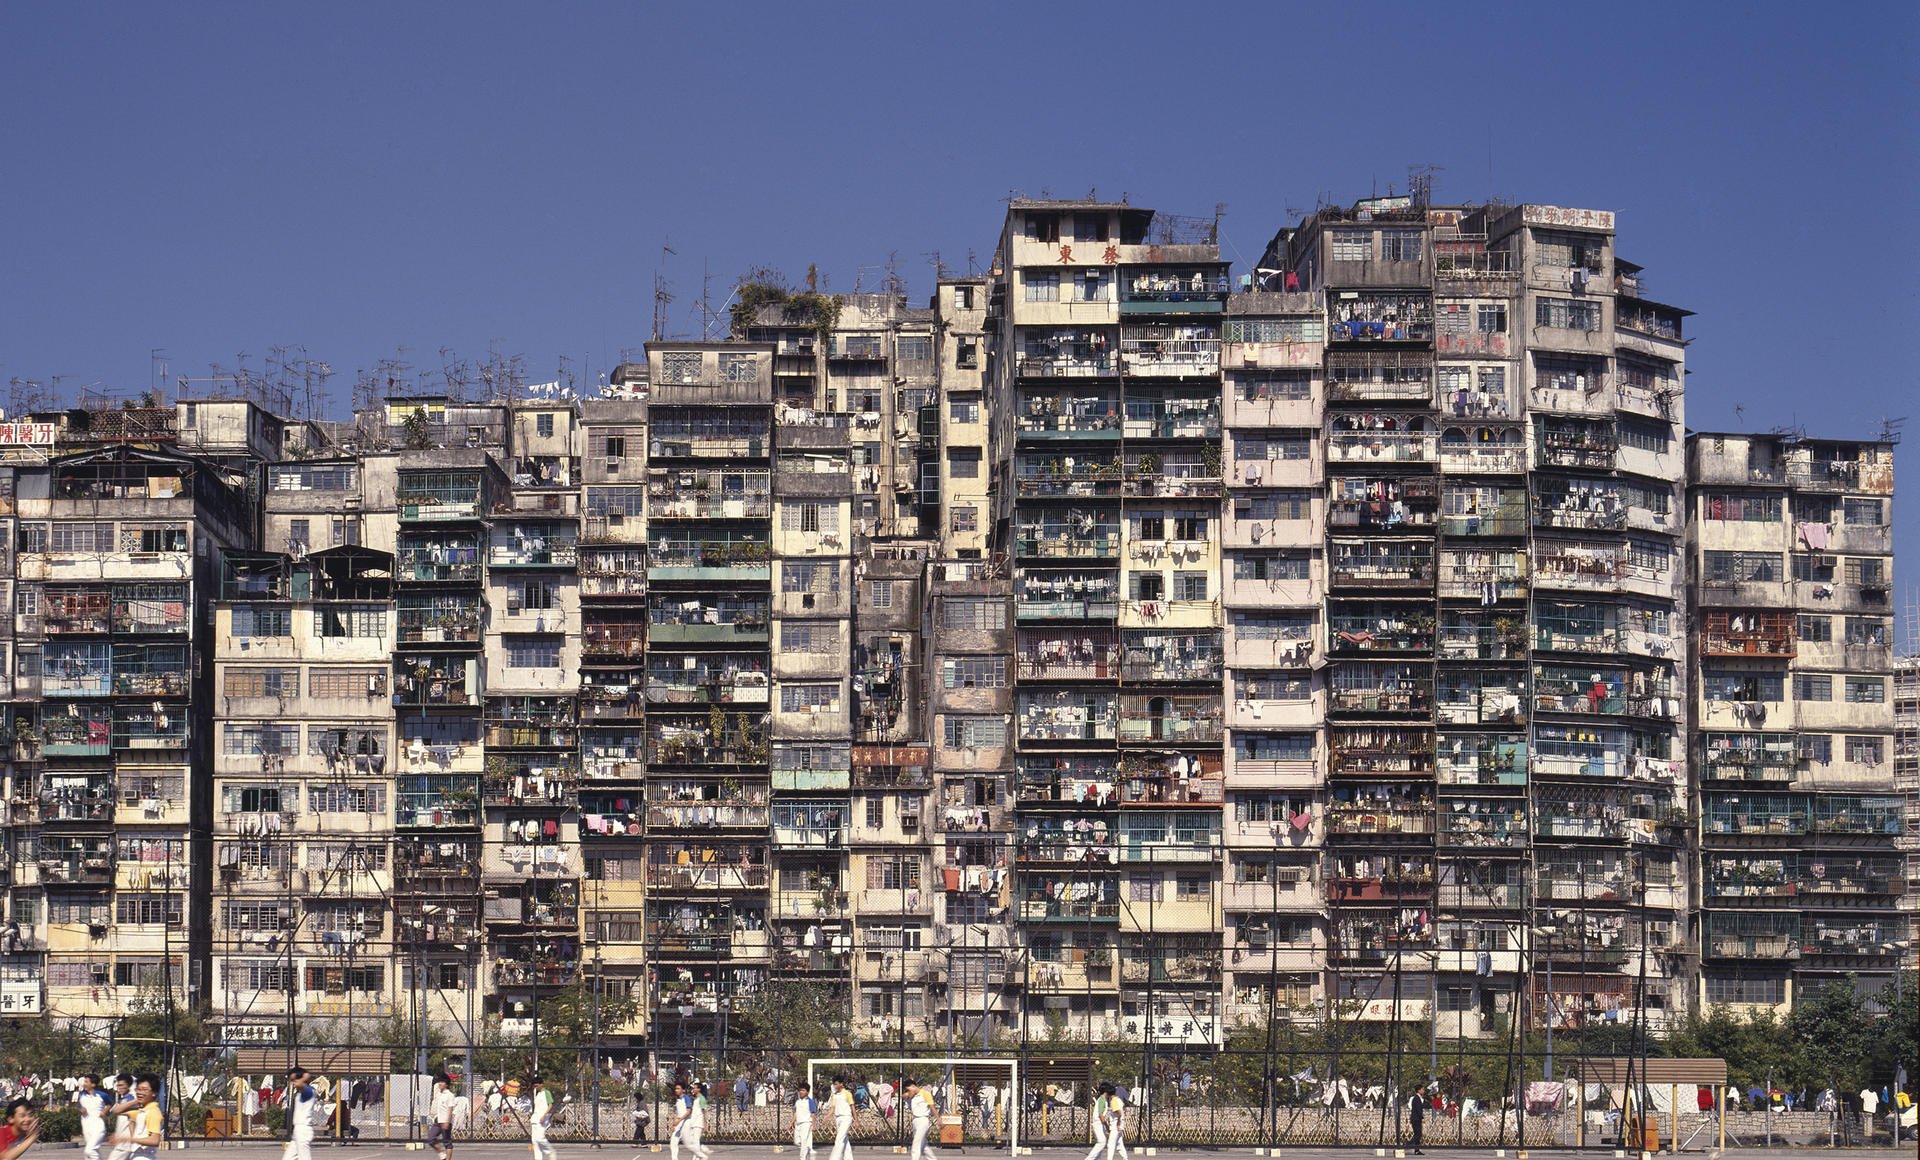 Kowloon Walled City was architecture without architects.Photo: Ian Lambot, from City of Darkness Revisited